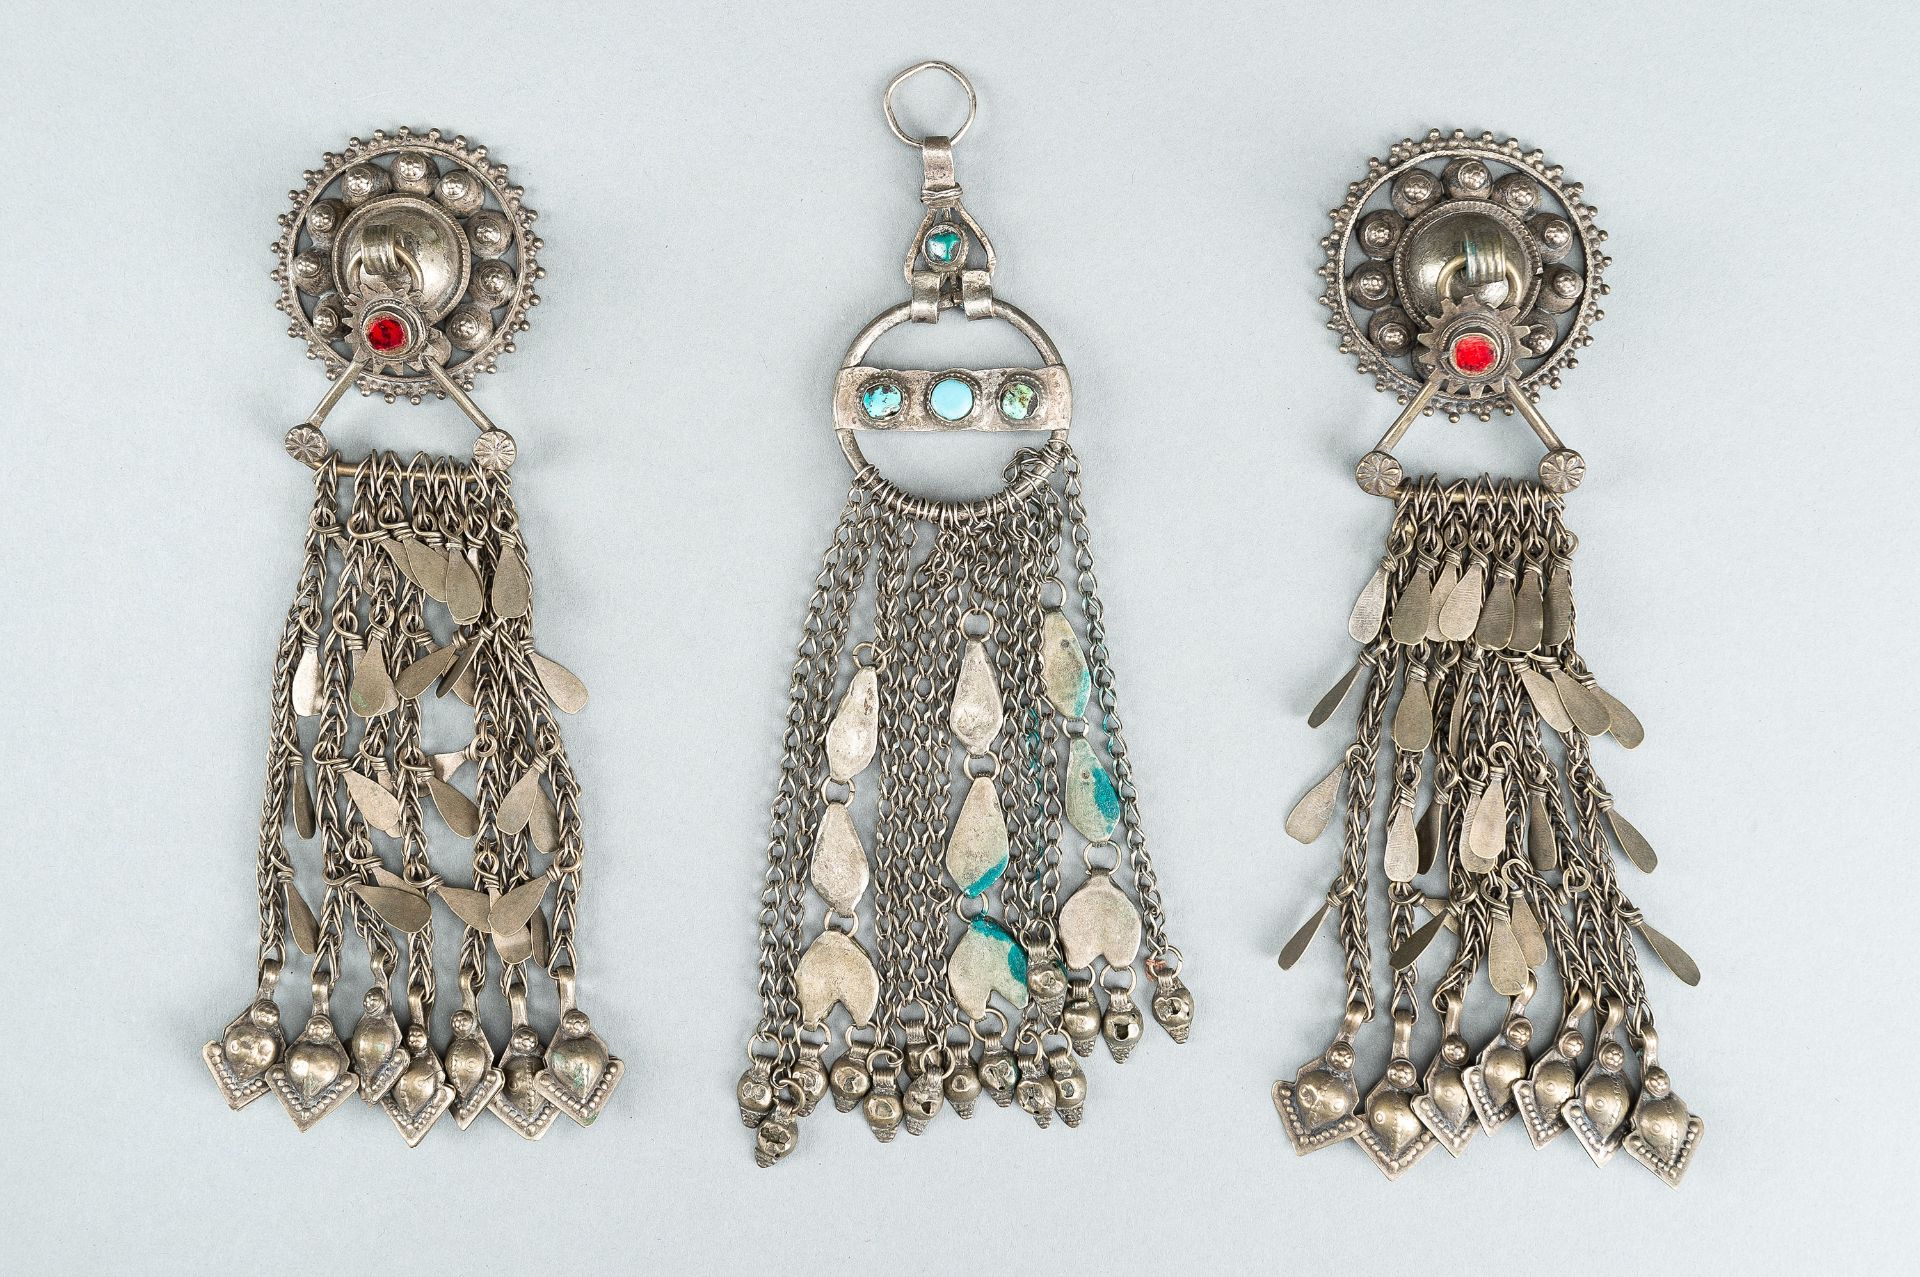 THREE TRIBAL AFGHAN METAL ORNAMENTS WITH INSETS, c. 1950s